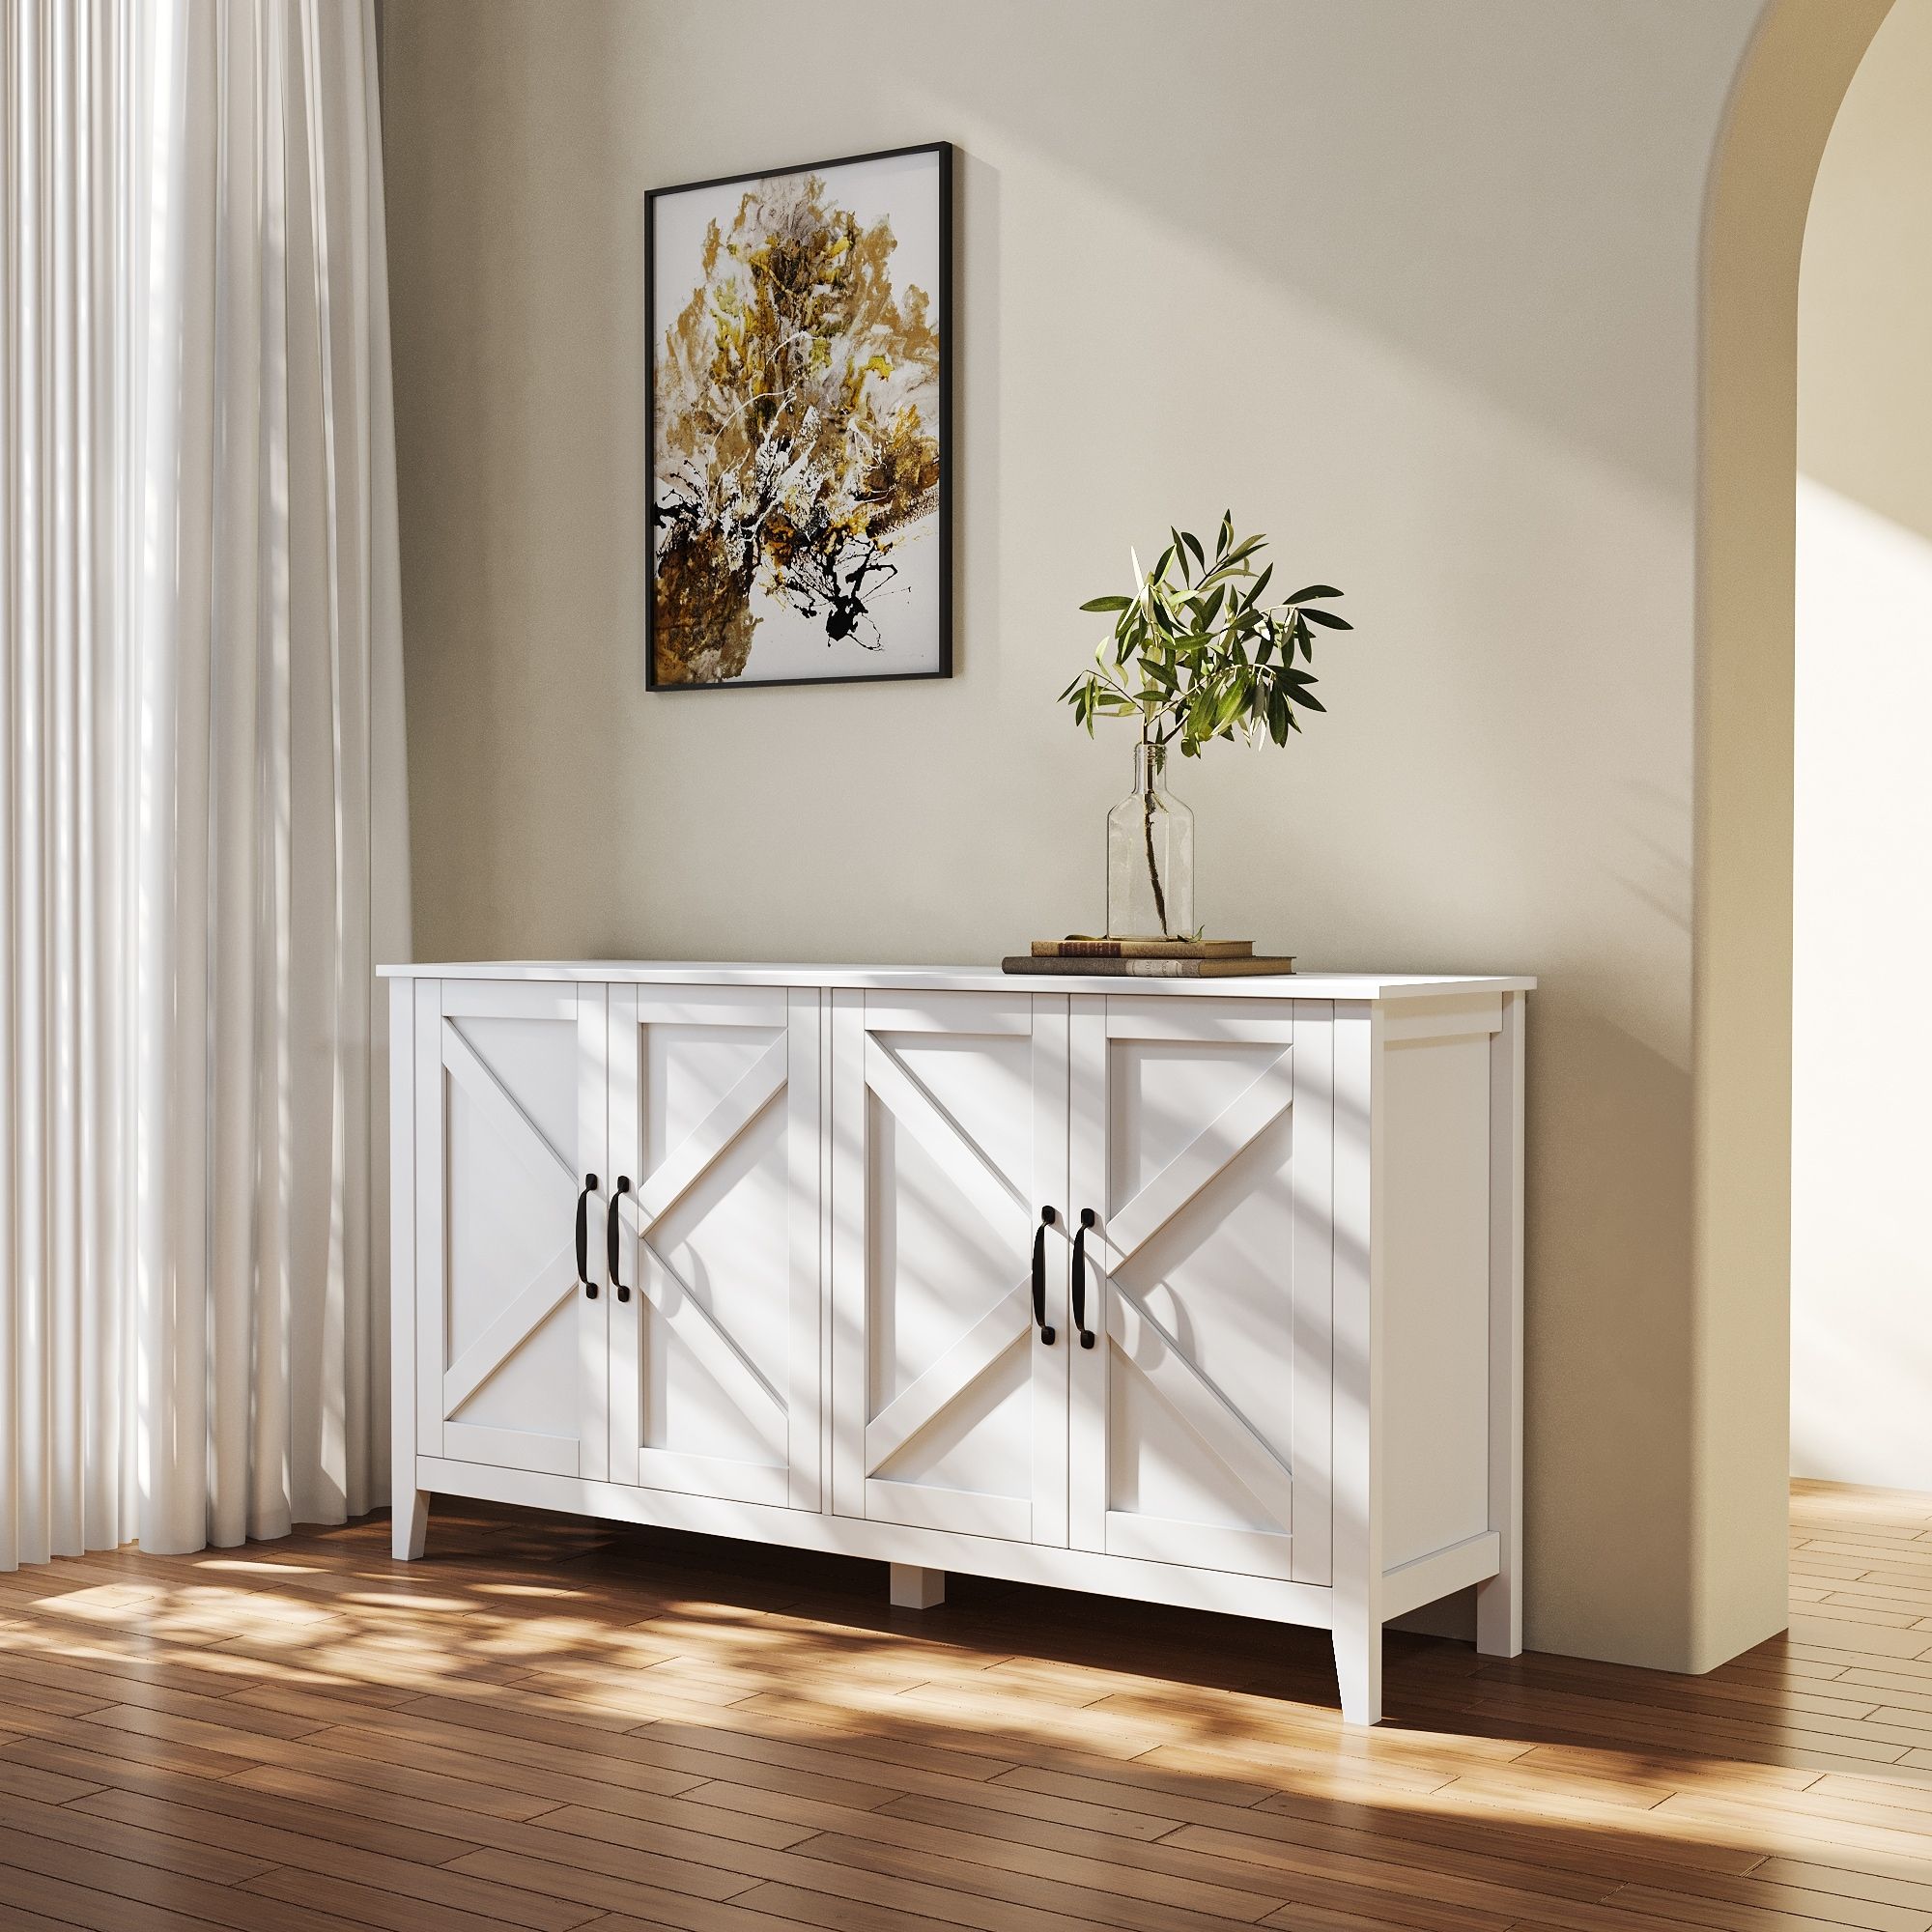 Sideboard Storage Entryway Floor Cabinet With 4 Shelves – Bed Bath & Beyond  – 37068169 Within Sideboards For Entryway (View 7 of 15)